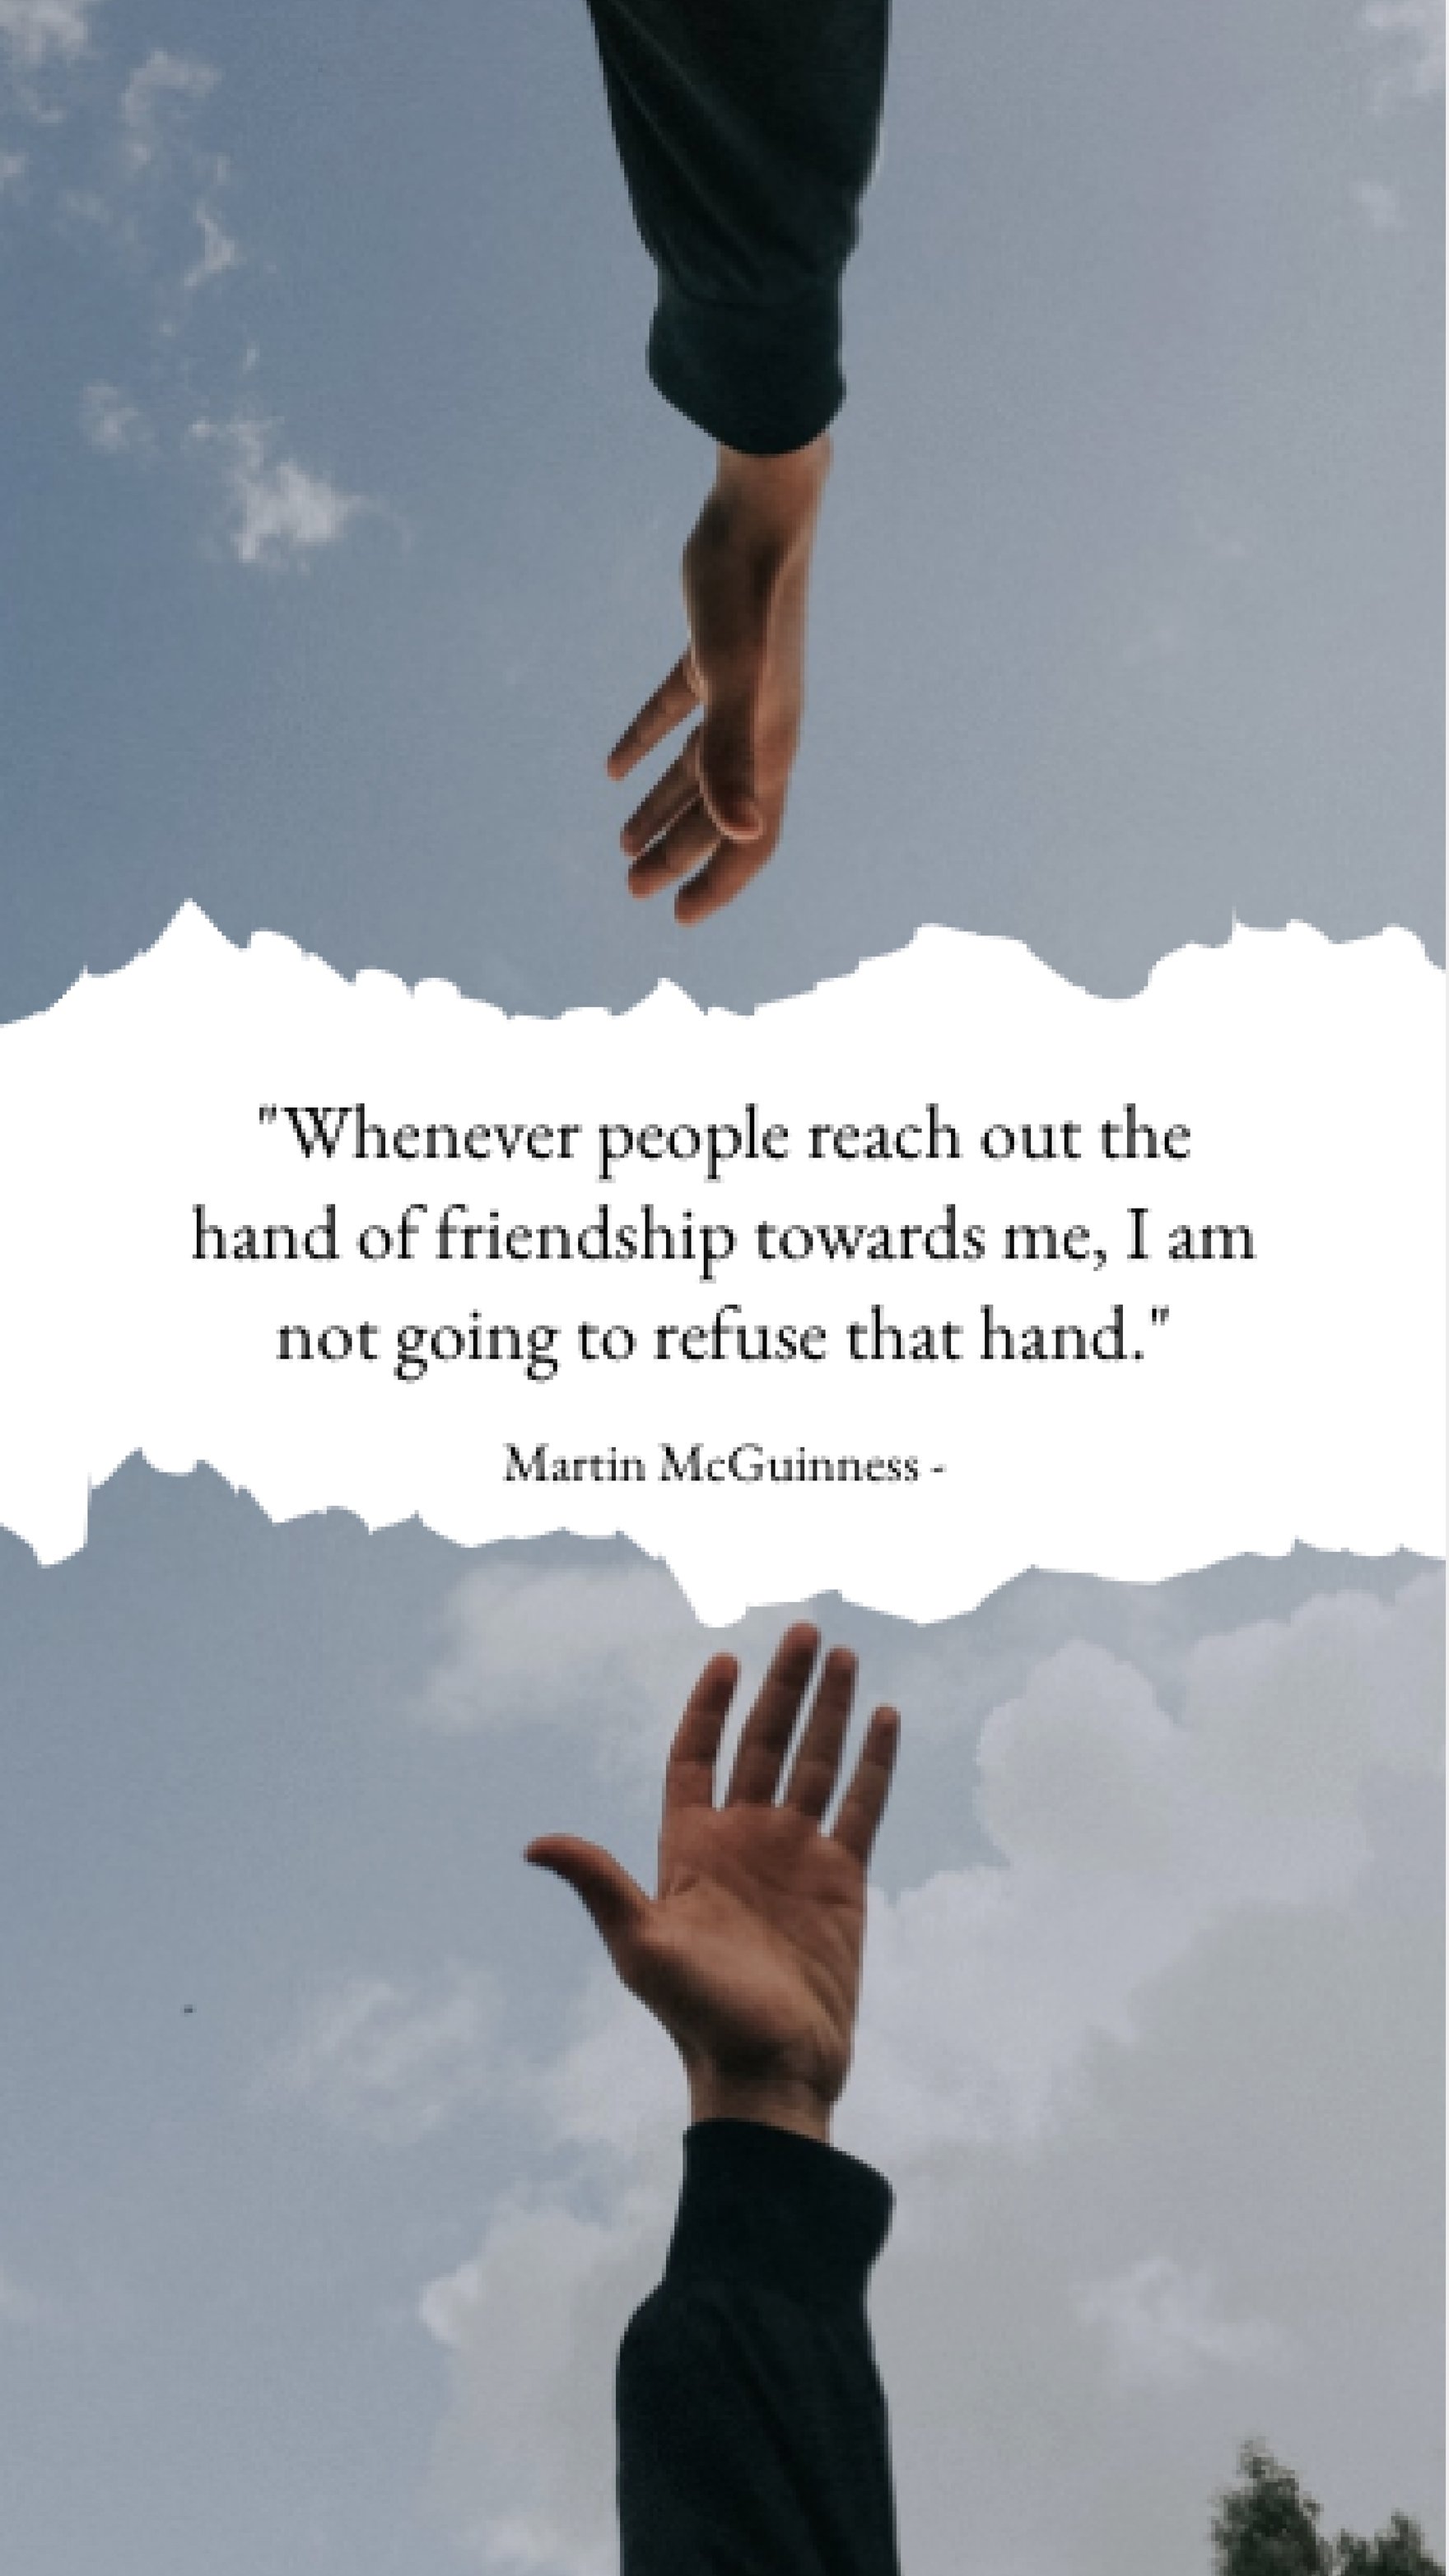 Martin McGuinness - Whenever people reach out the hand of friendship towards me, I am not going to refuse that hand. Template